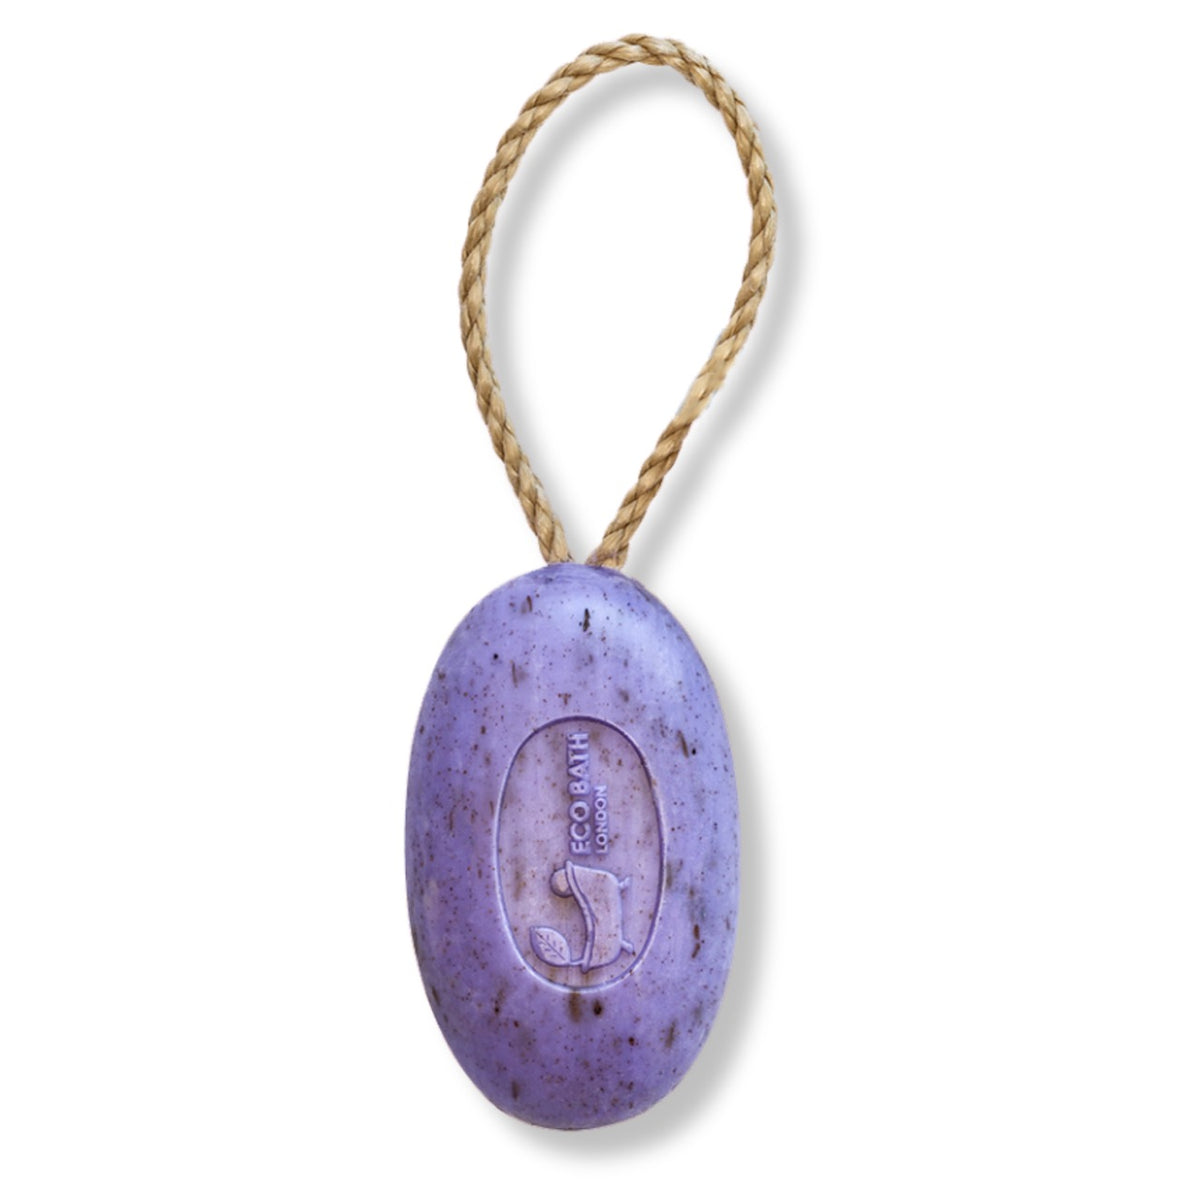 Eco Bath Lavender Soap on a Rope - 220g